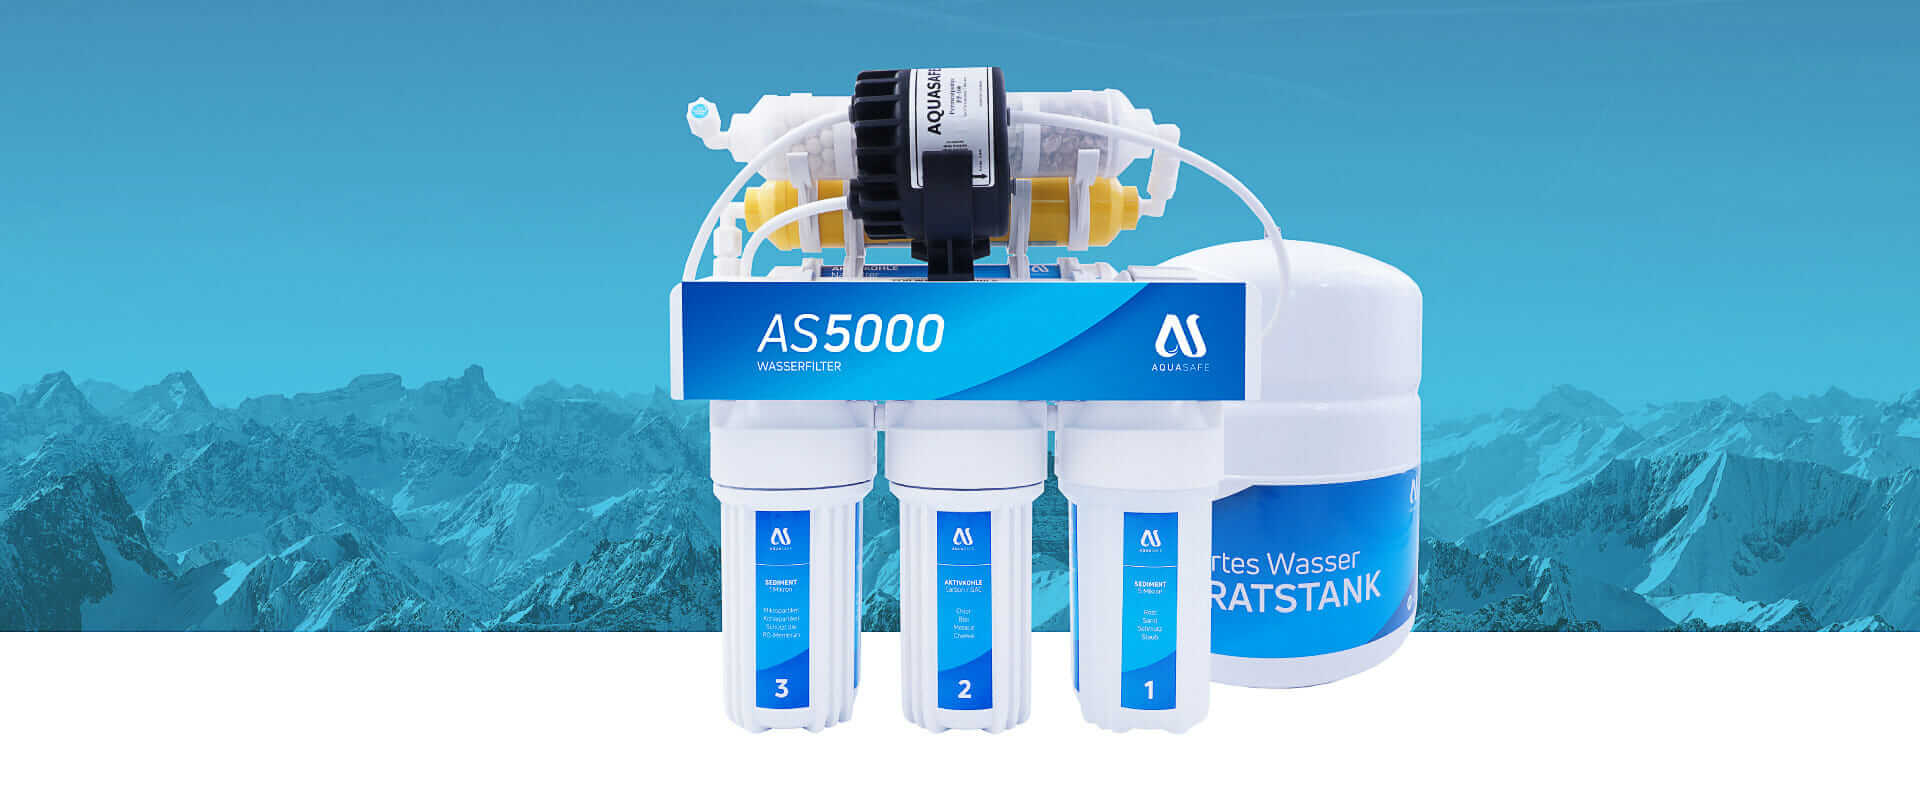 AS5000 water filtration system 7 stage with eco pump on blue background